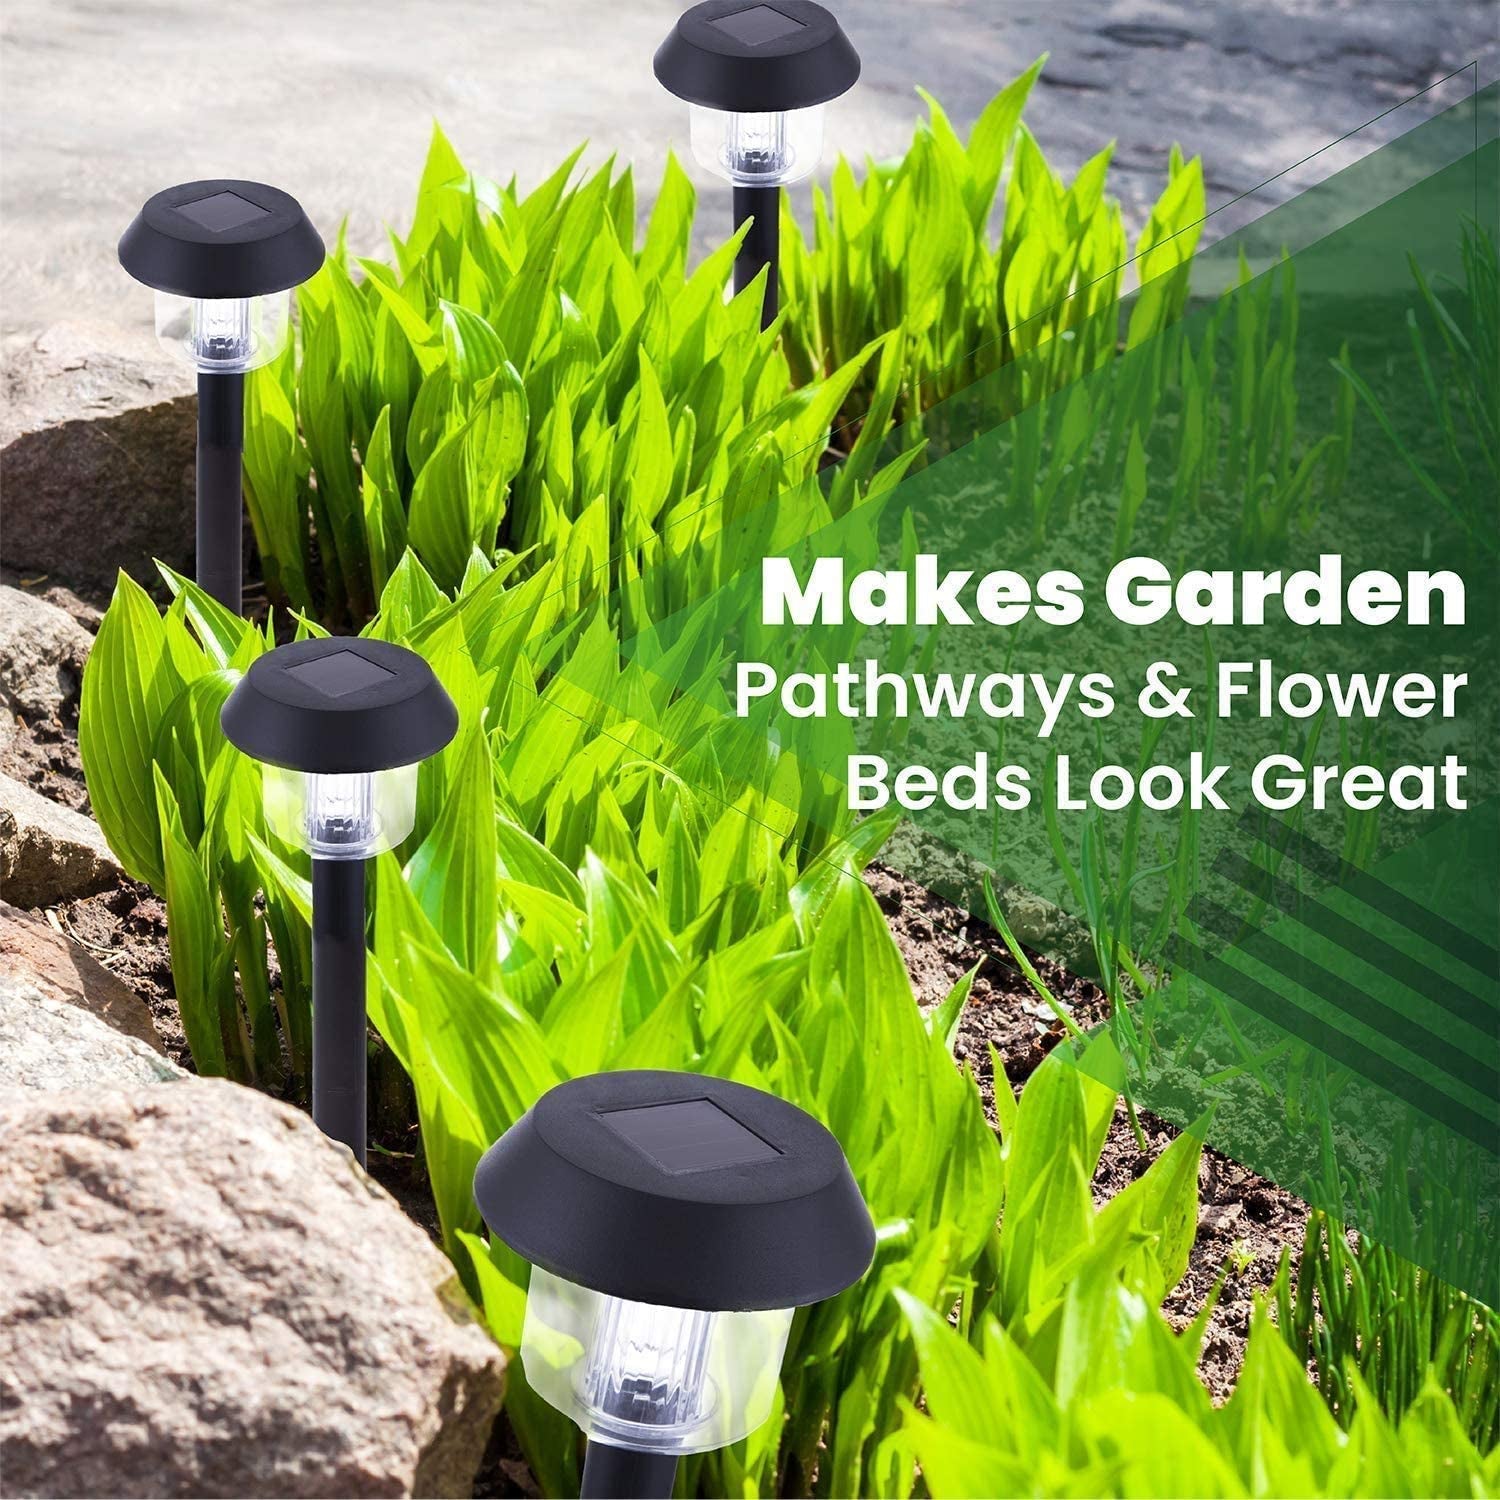 Solar Garden Lights - Auto On/Off Outdoor Bright Solar Pathway Lights - All-Weather/Waterproof Outdoor Solar Lights for Yard, Garden, or Driveway (8-Pack, Black)